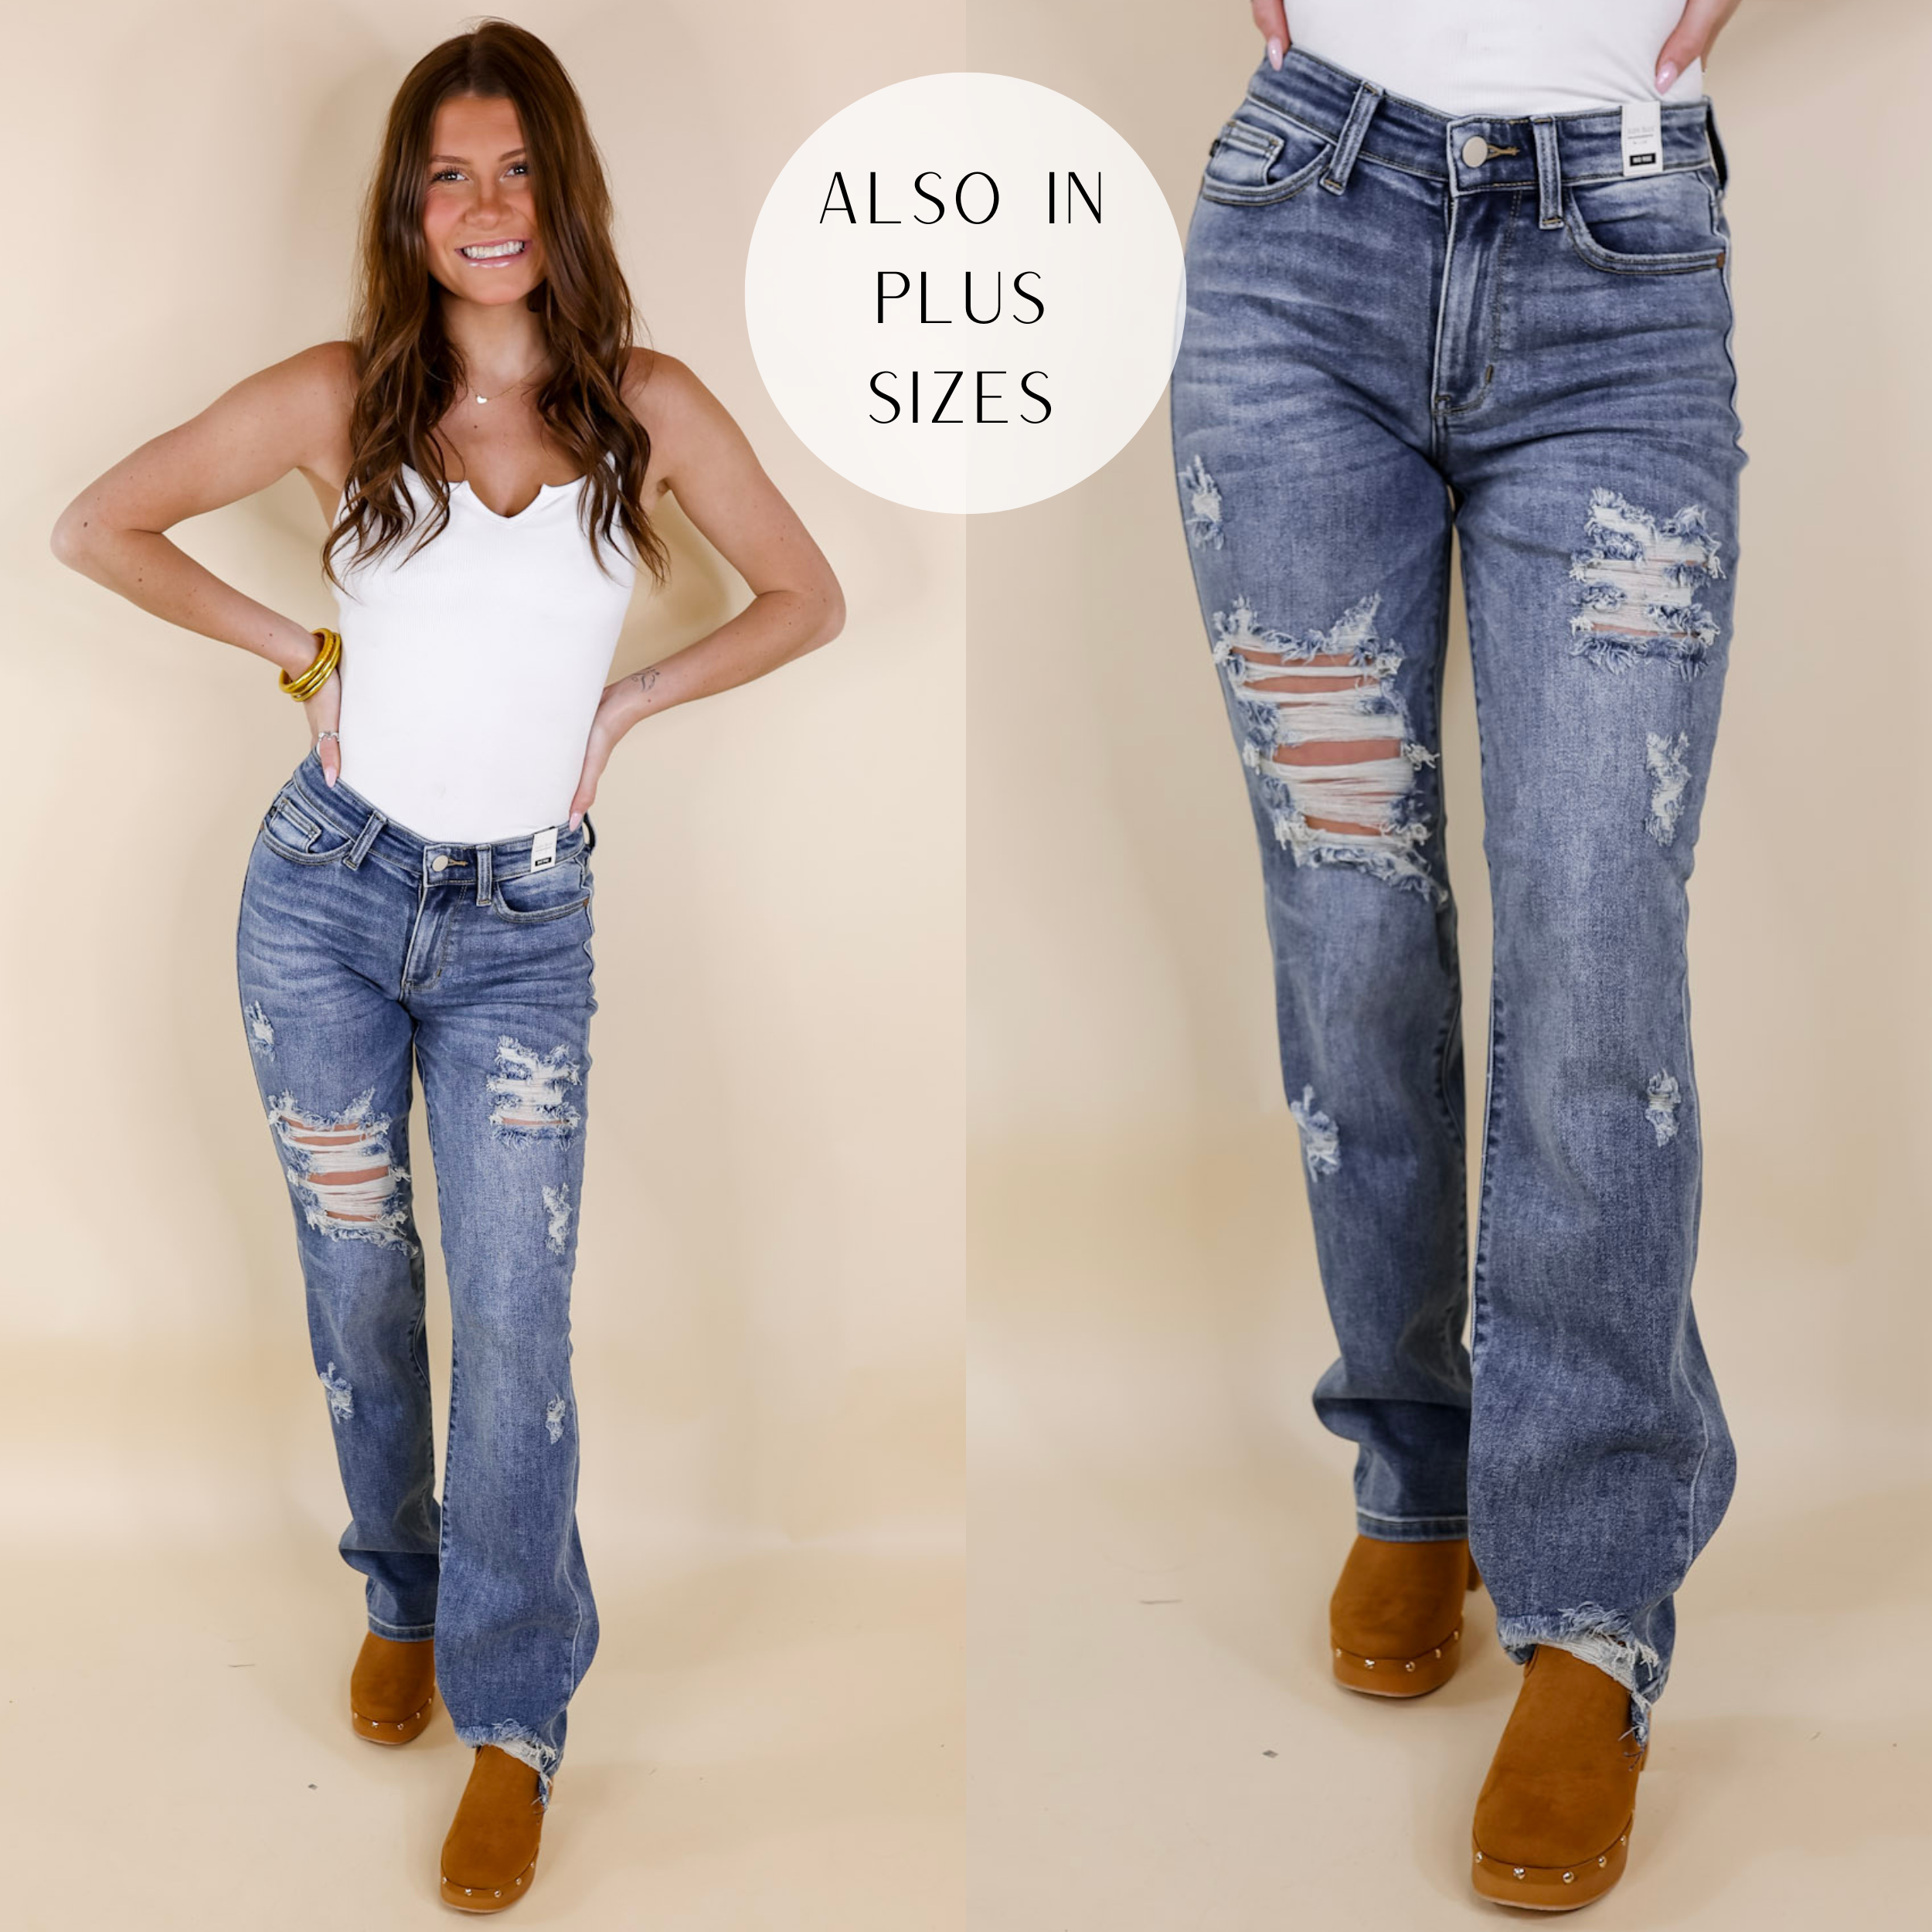 Model is wearing a pair of medium wash jeans with a straight leg fit and lots of distressing. Model has it paired with brown clogs, a white bodysuit, and gold jewelry.